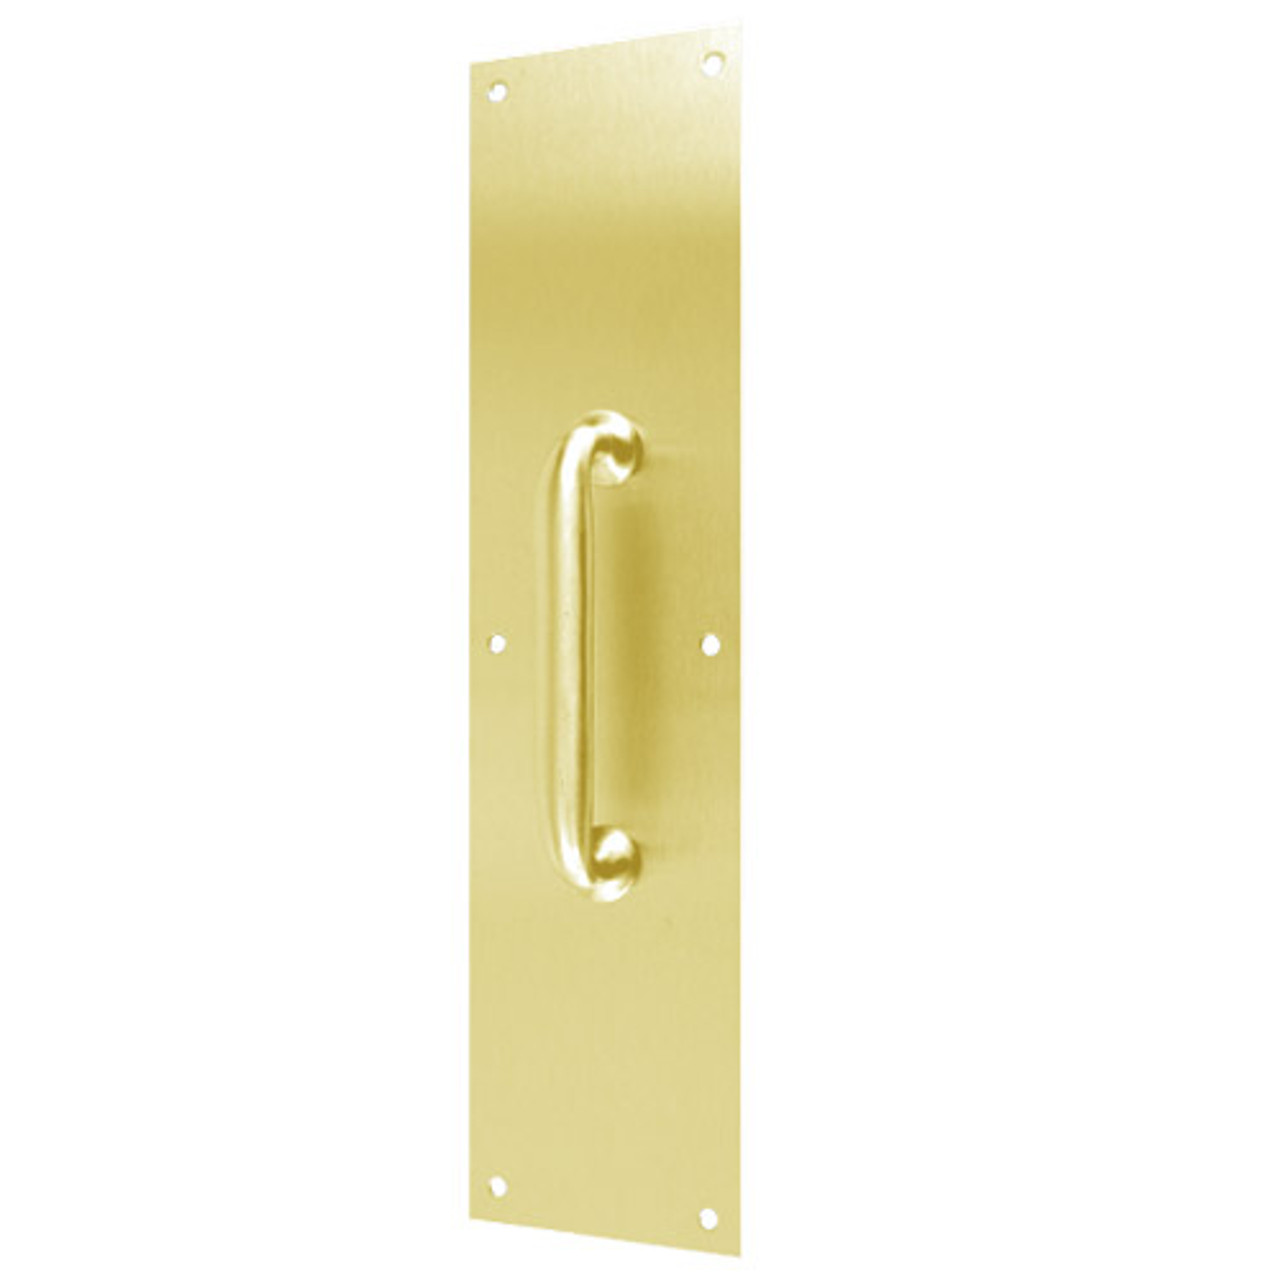 7110-605 Don Jo Pull Plates with Cast Pull in Bright Brass Finish